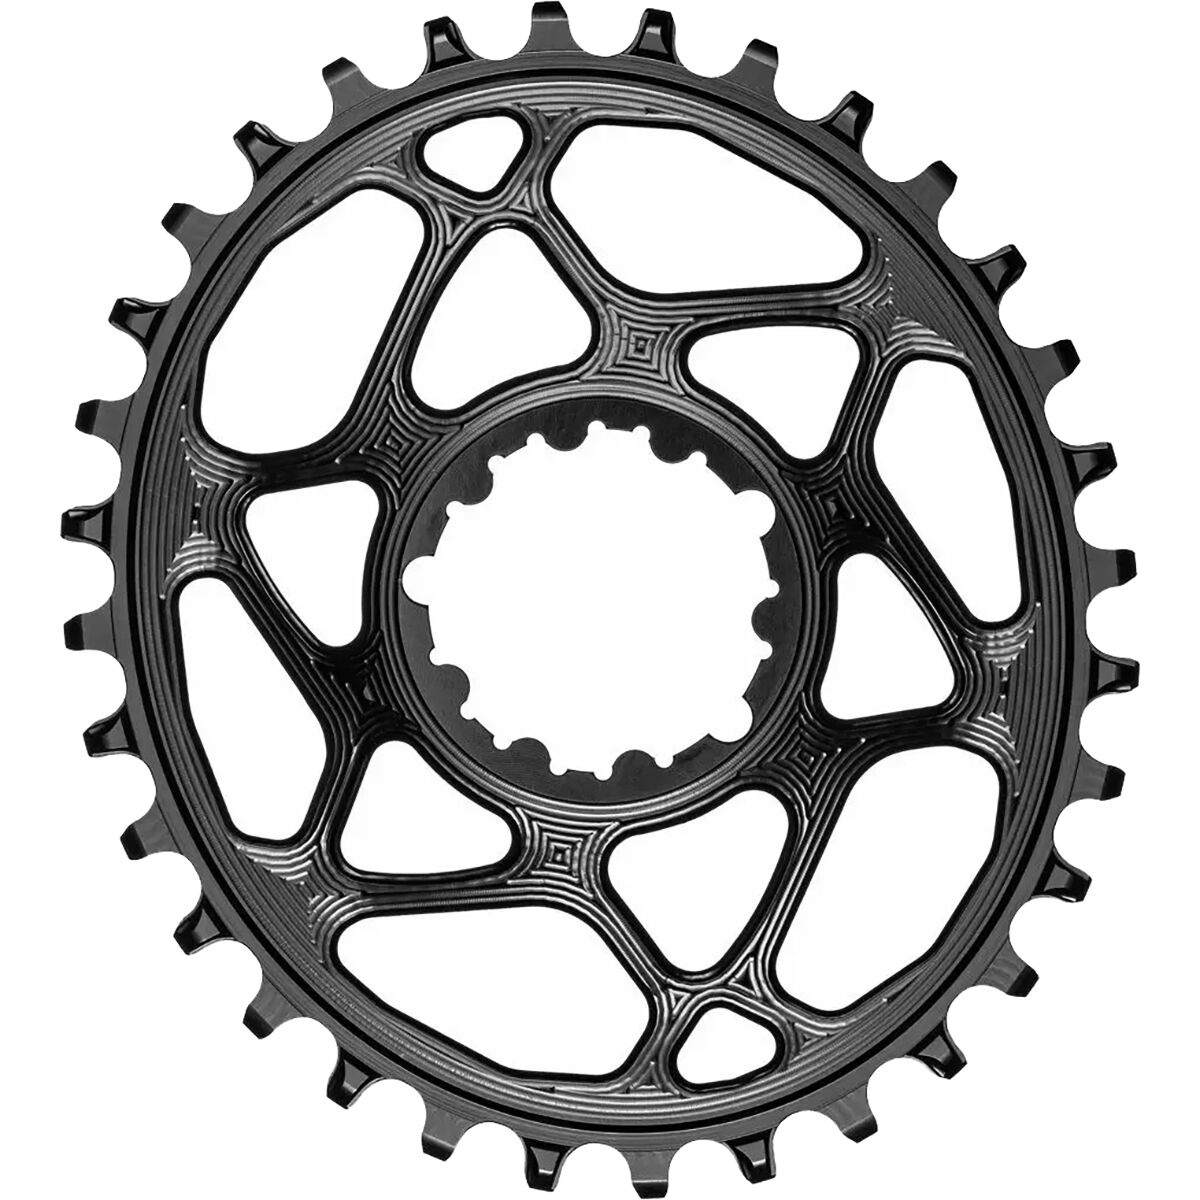 absoluteBLACK SRAM Oval Boost148 Direct Mount Traction Chainring